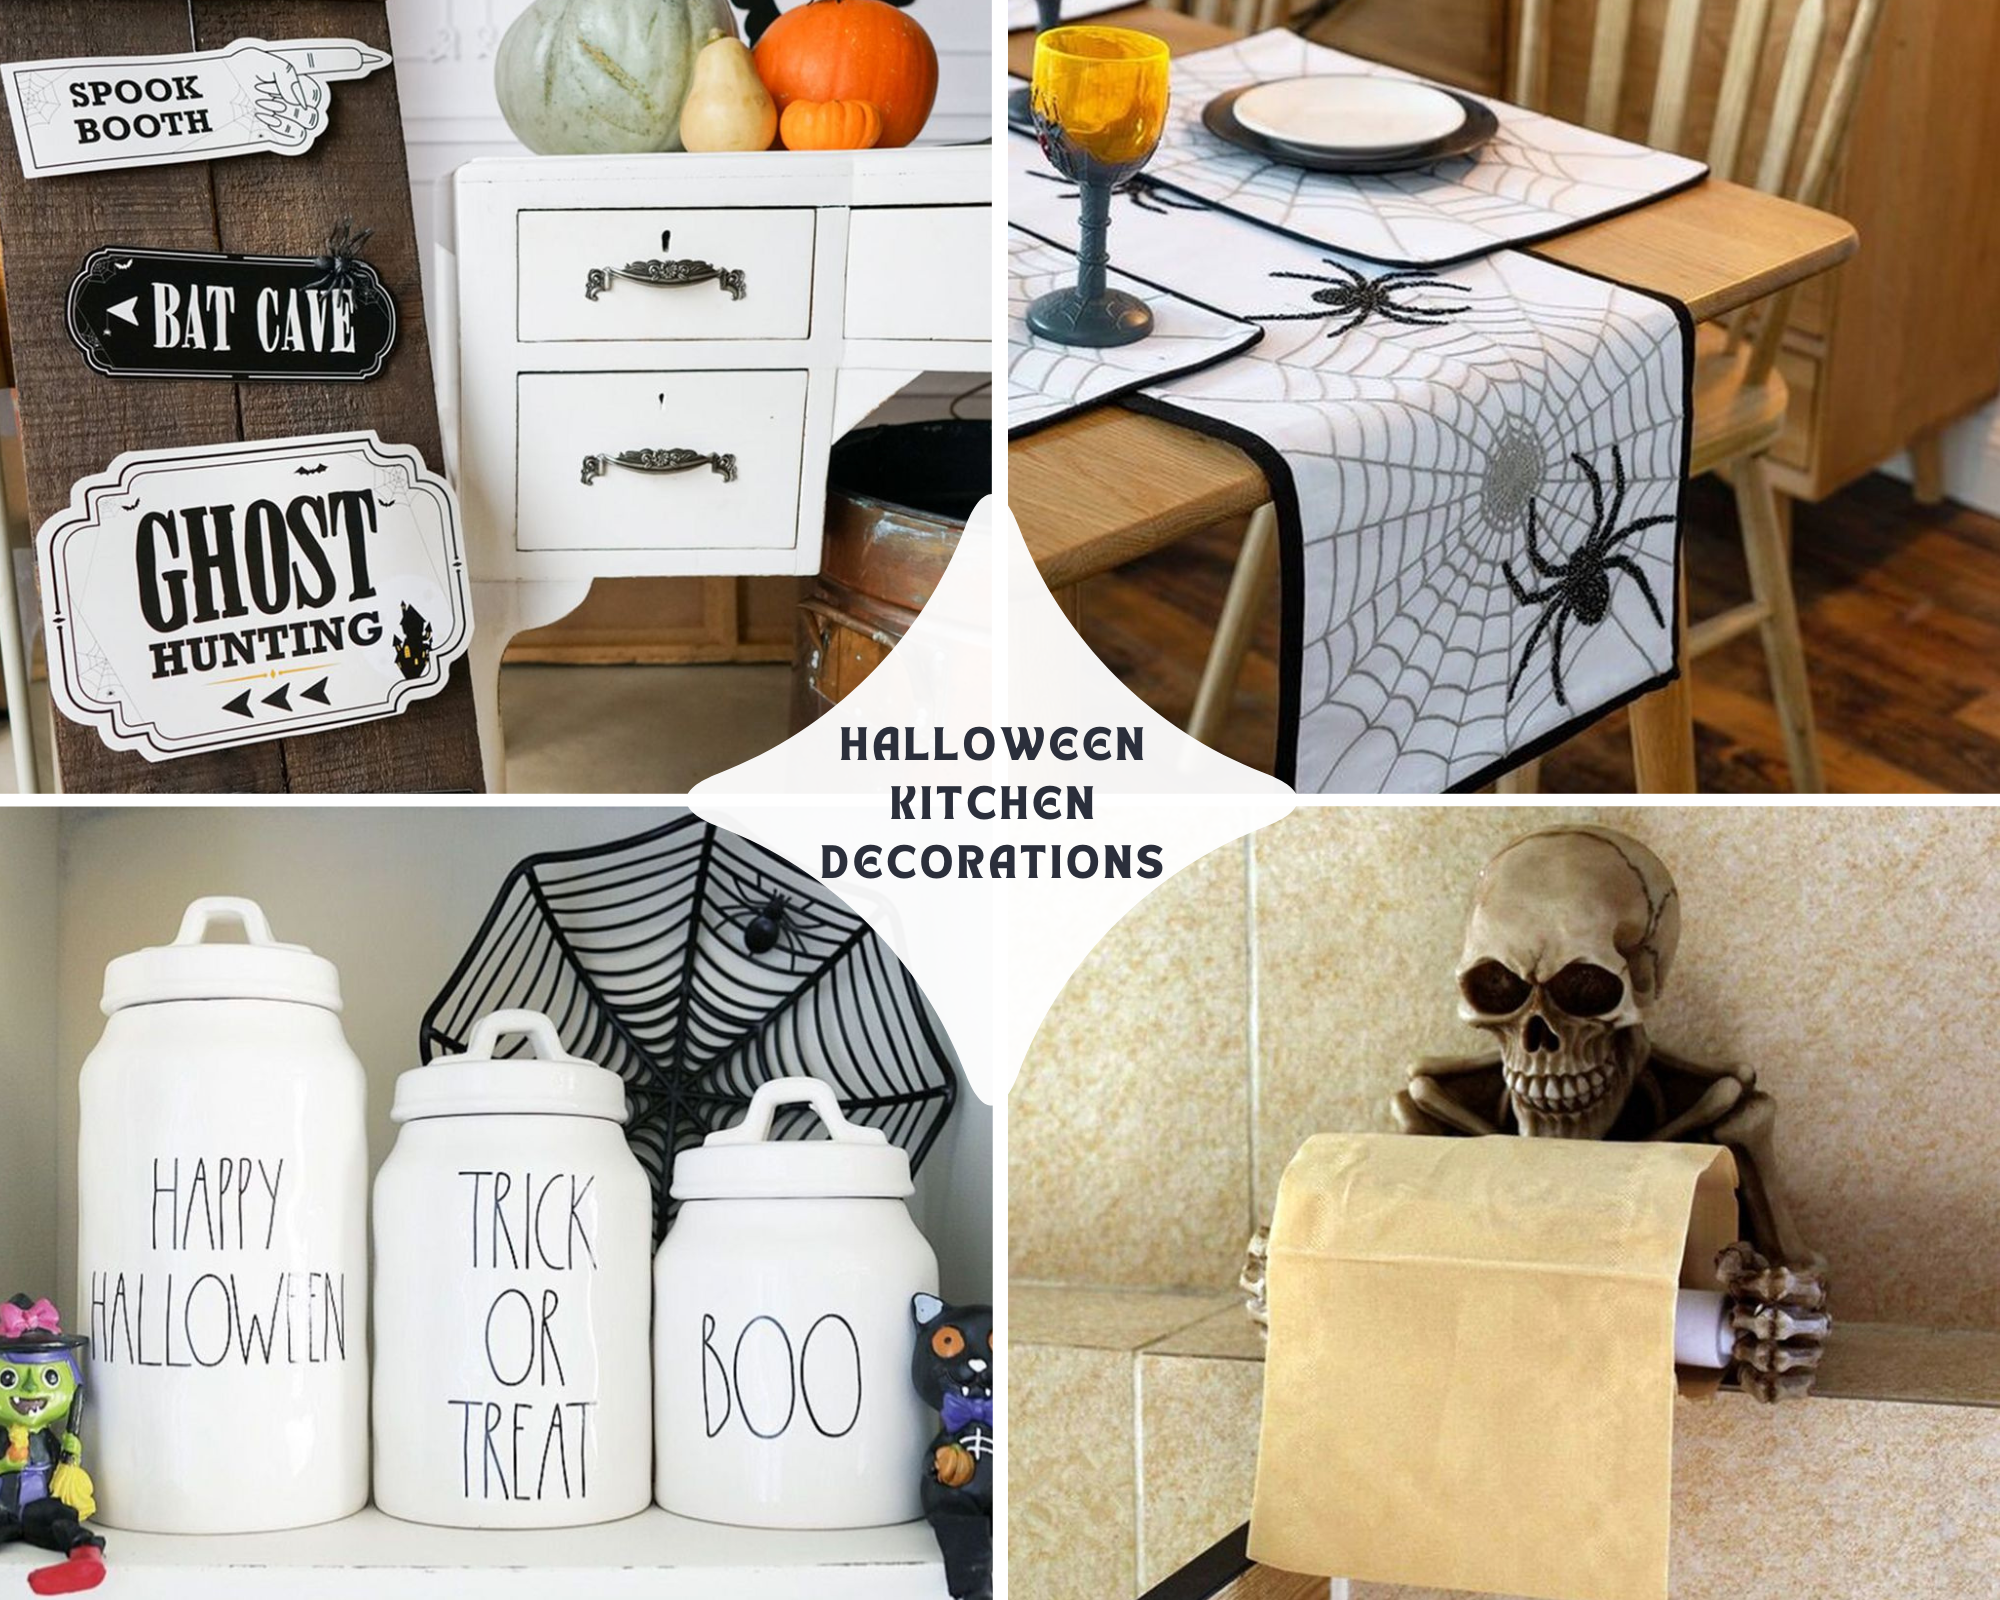 Festive 10 Halloween Kitchen Decorations to Create a Spooky Atmosphere